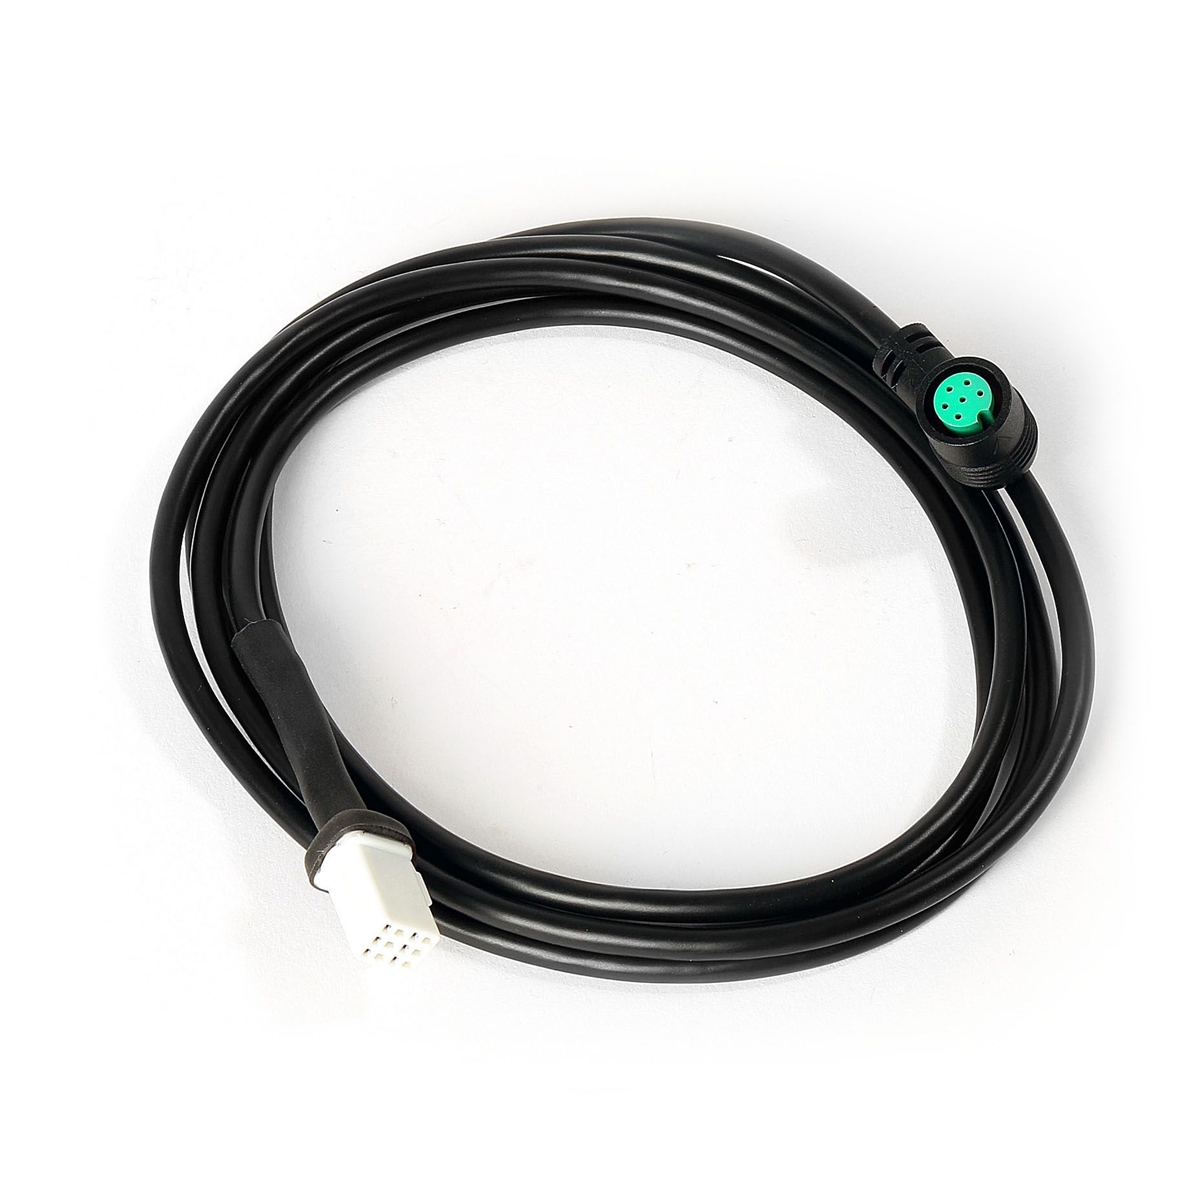 D0/Motor Display Cable